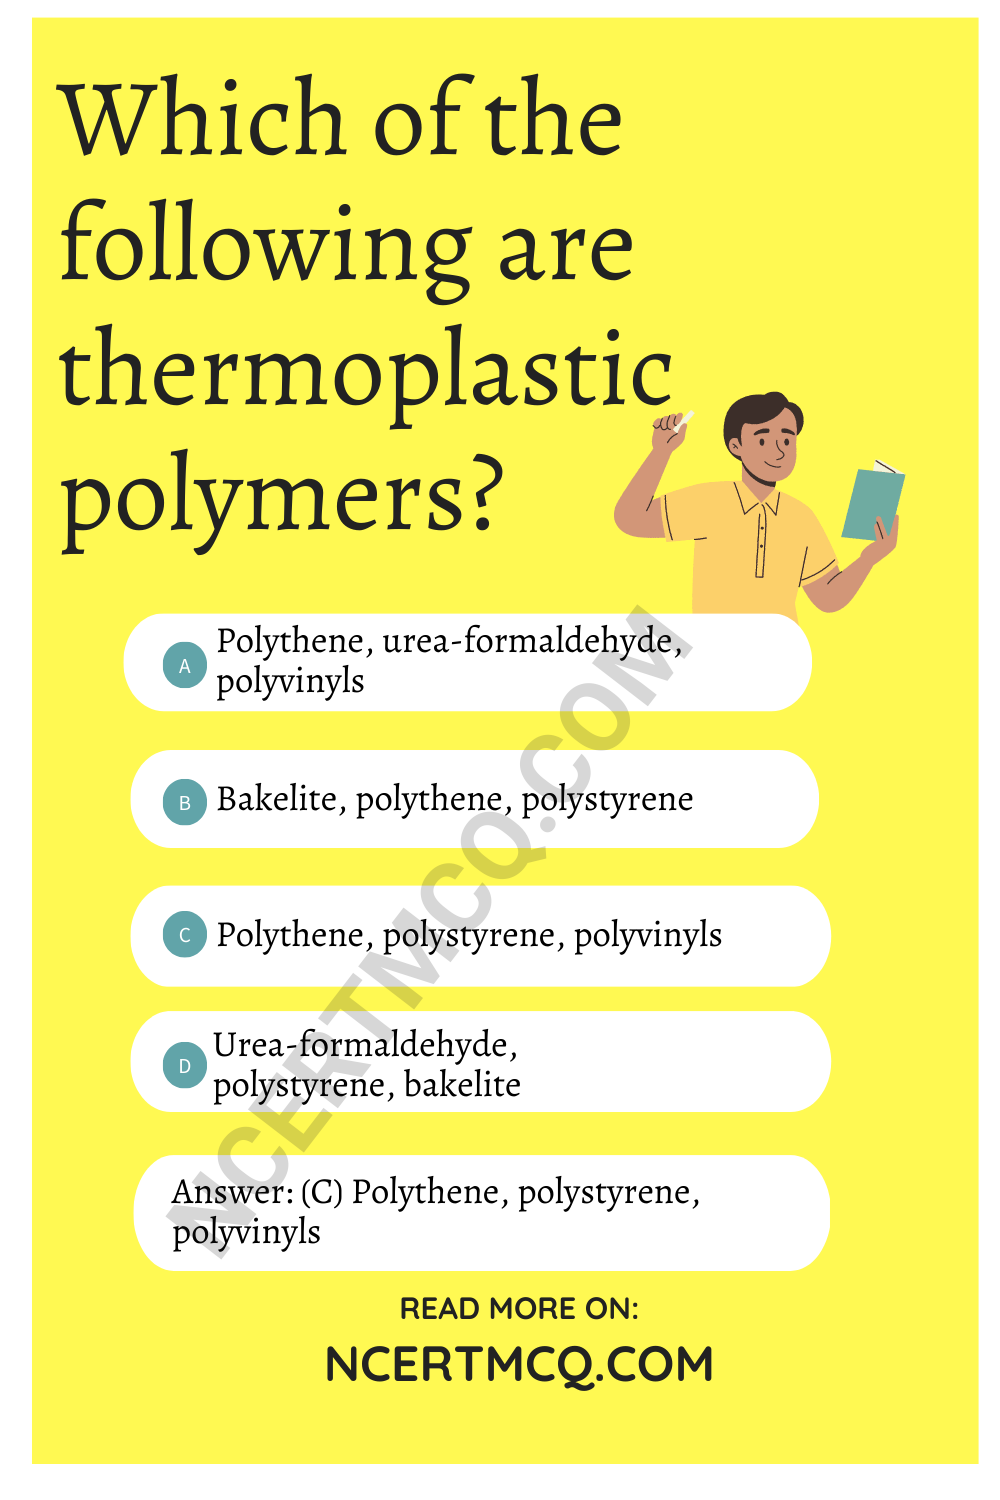 Which of the following are thermoplastic polymers?